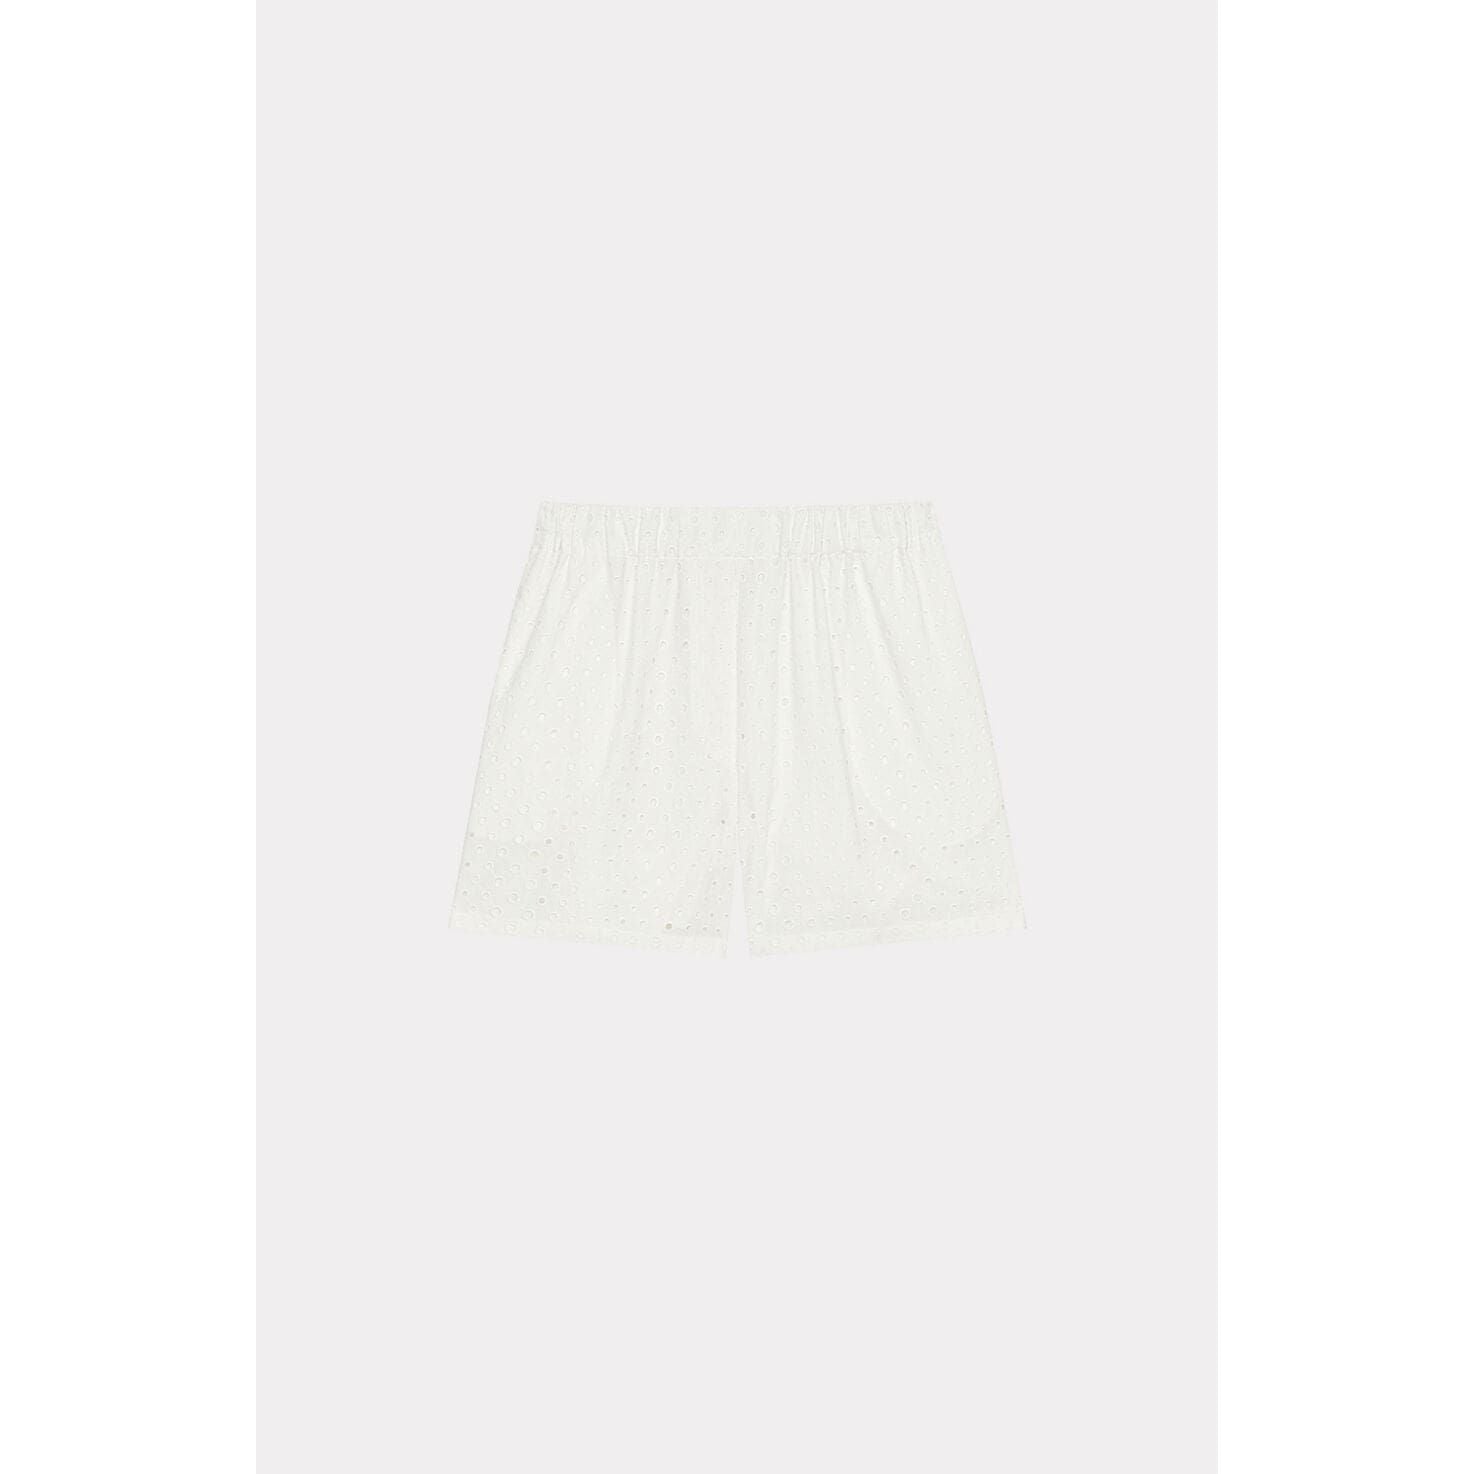 KENZO BRODERIE ANGLAISE SHORTS - Yooto